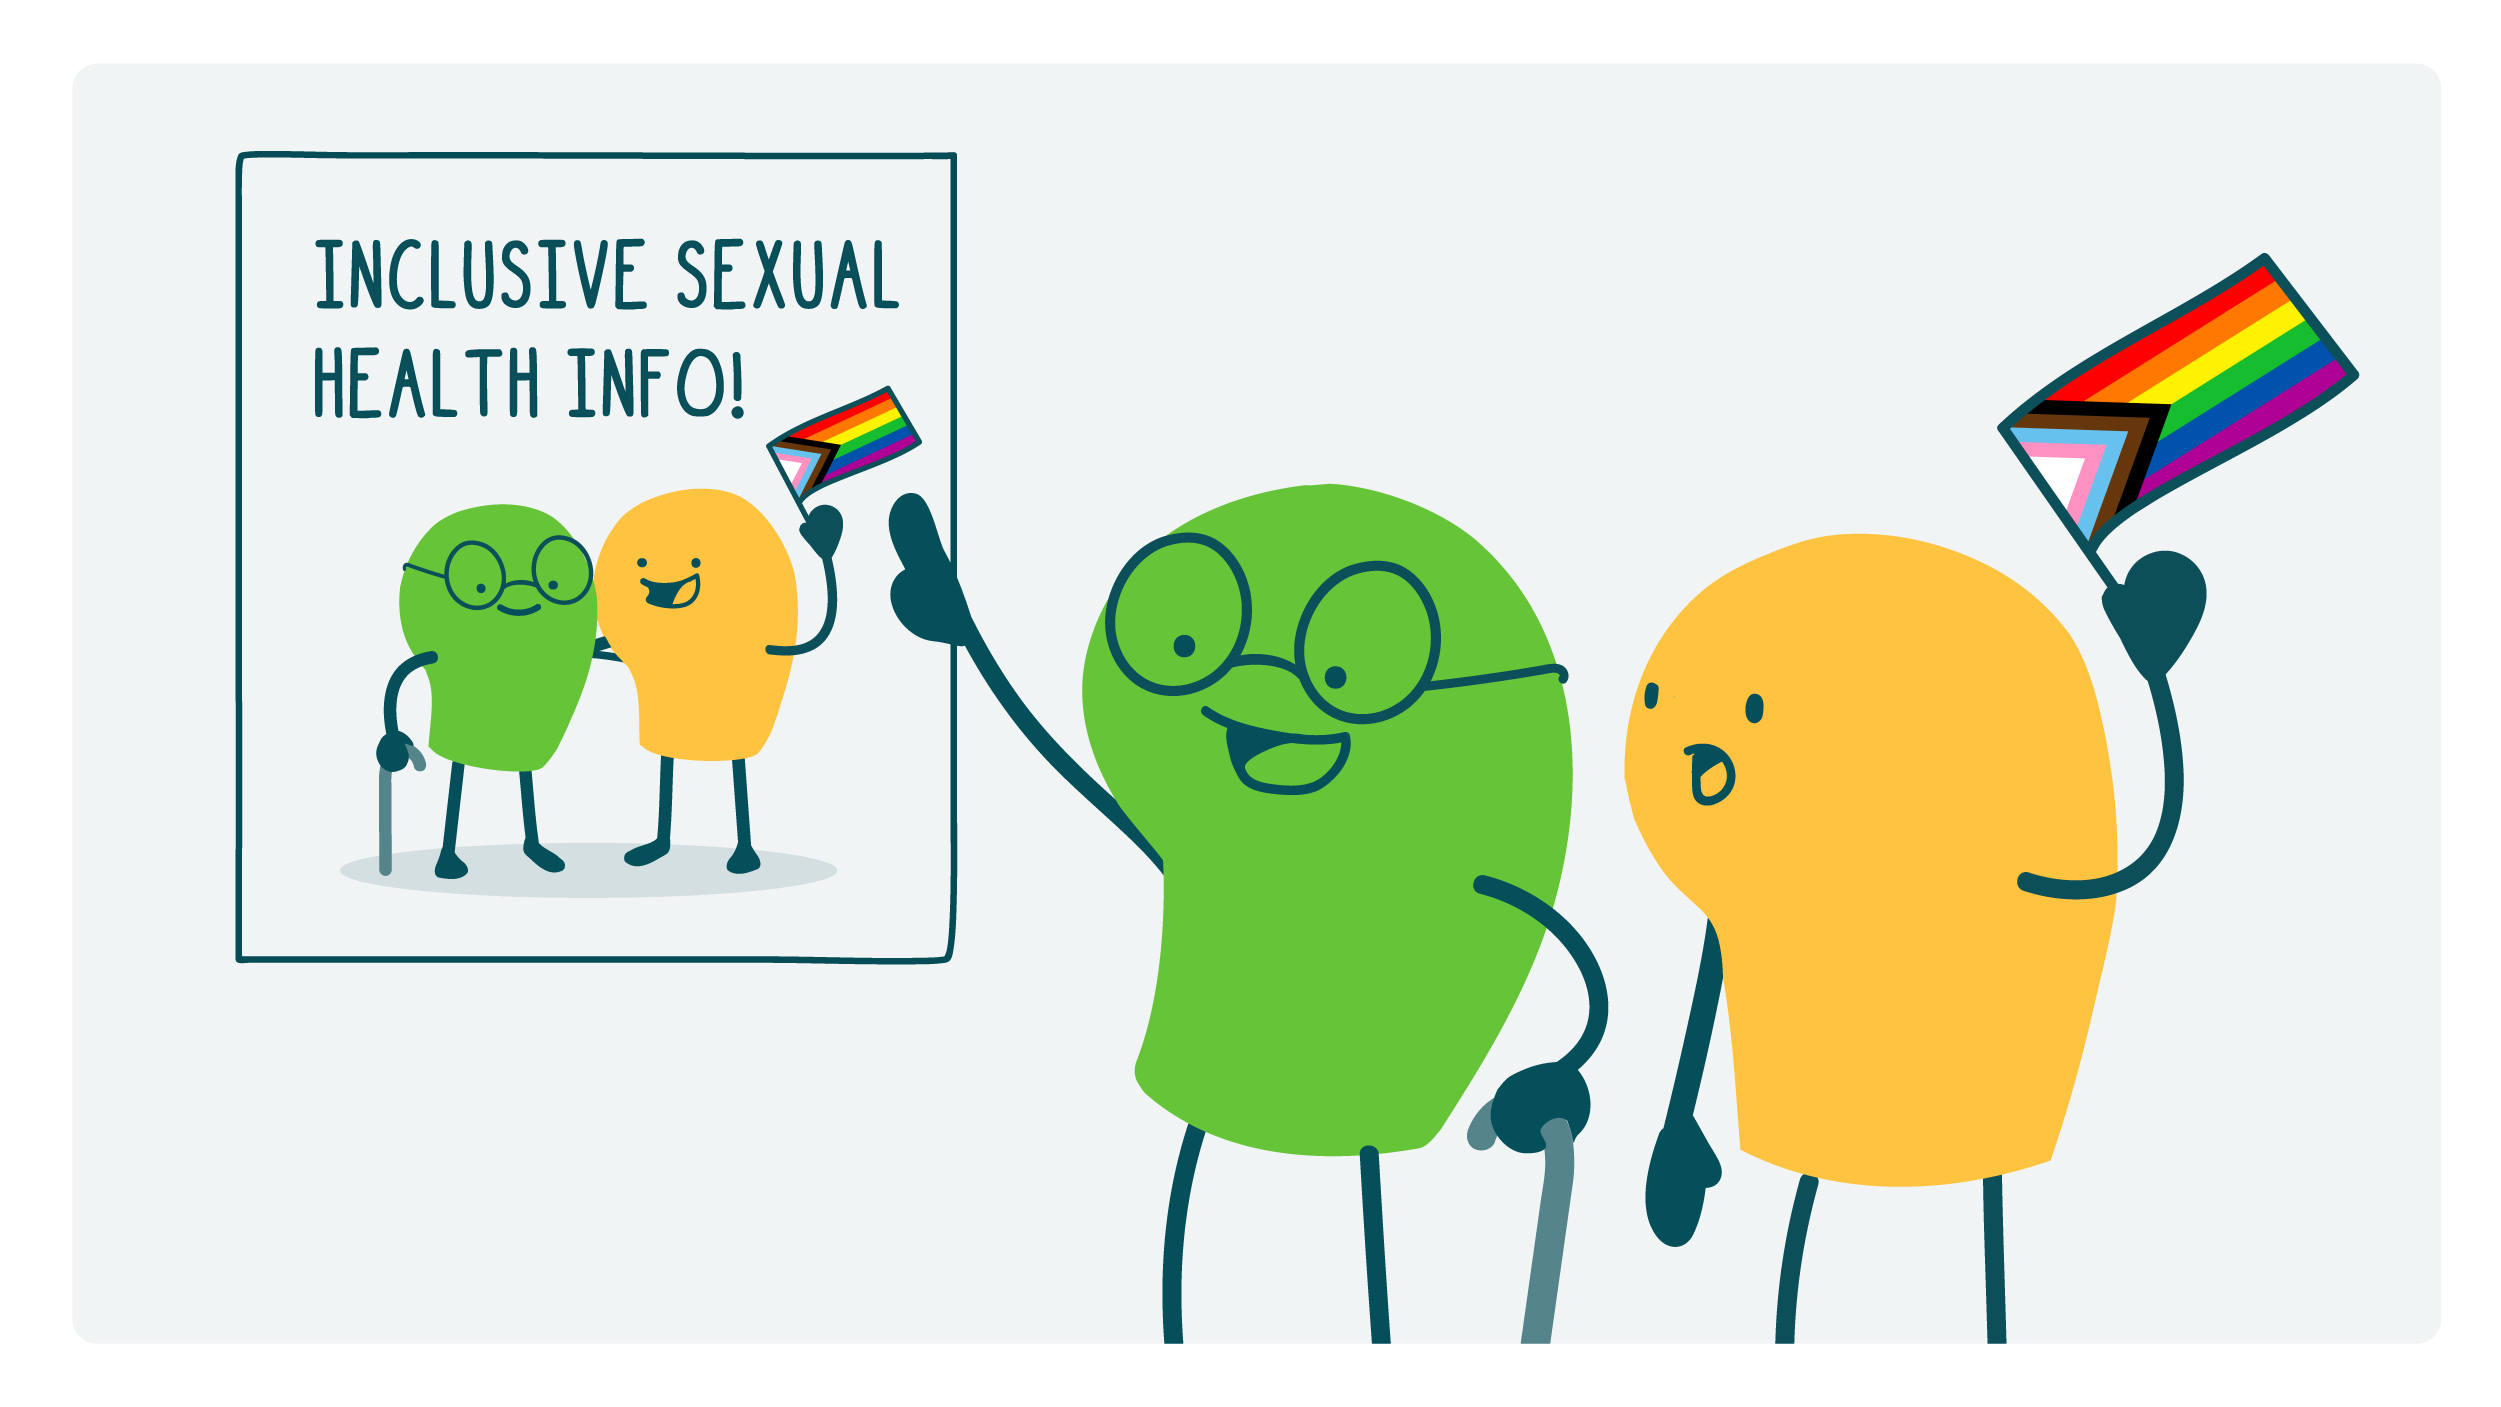 A doodle holding a Pride flag and a doodle with a walking stick look at a poster that says “Inclusive sexual health info!” The poster has an image of doodles who look like them. 